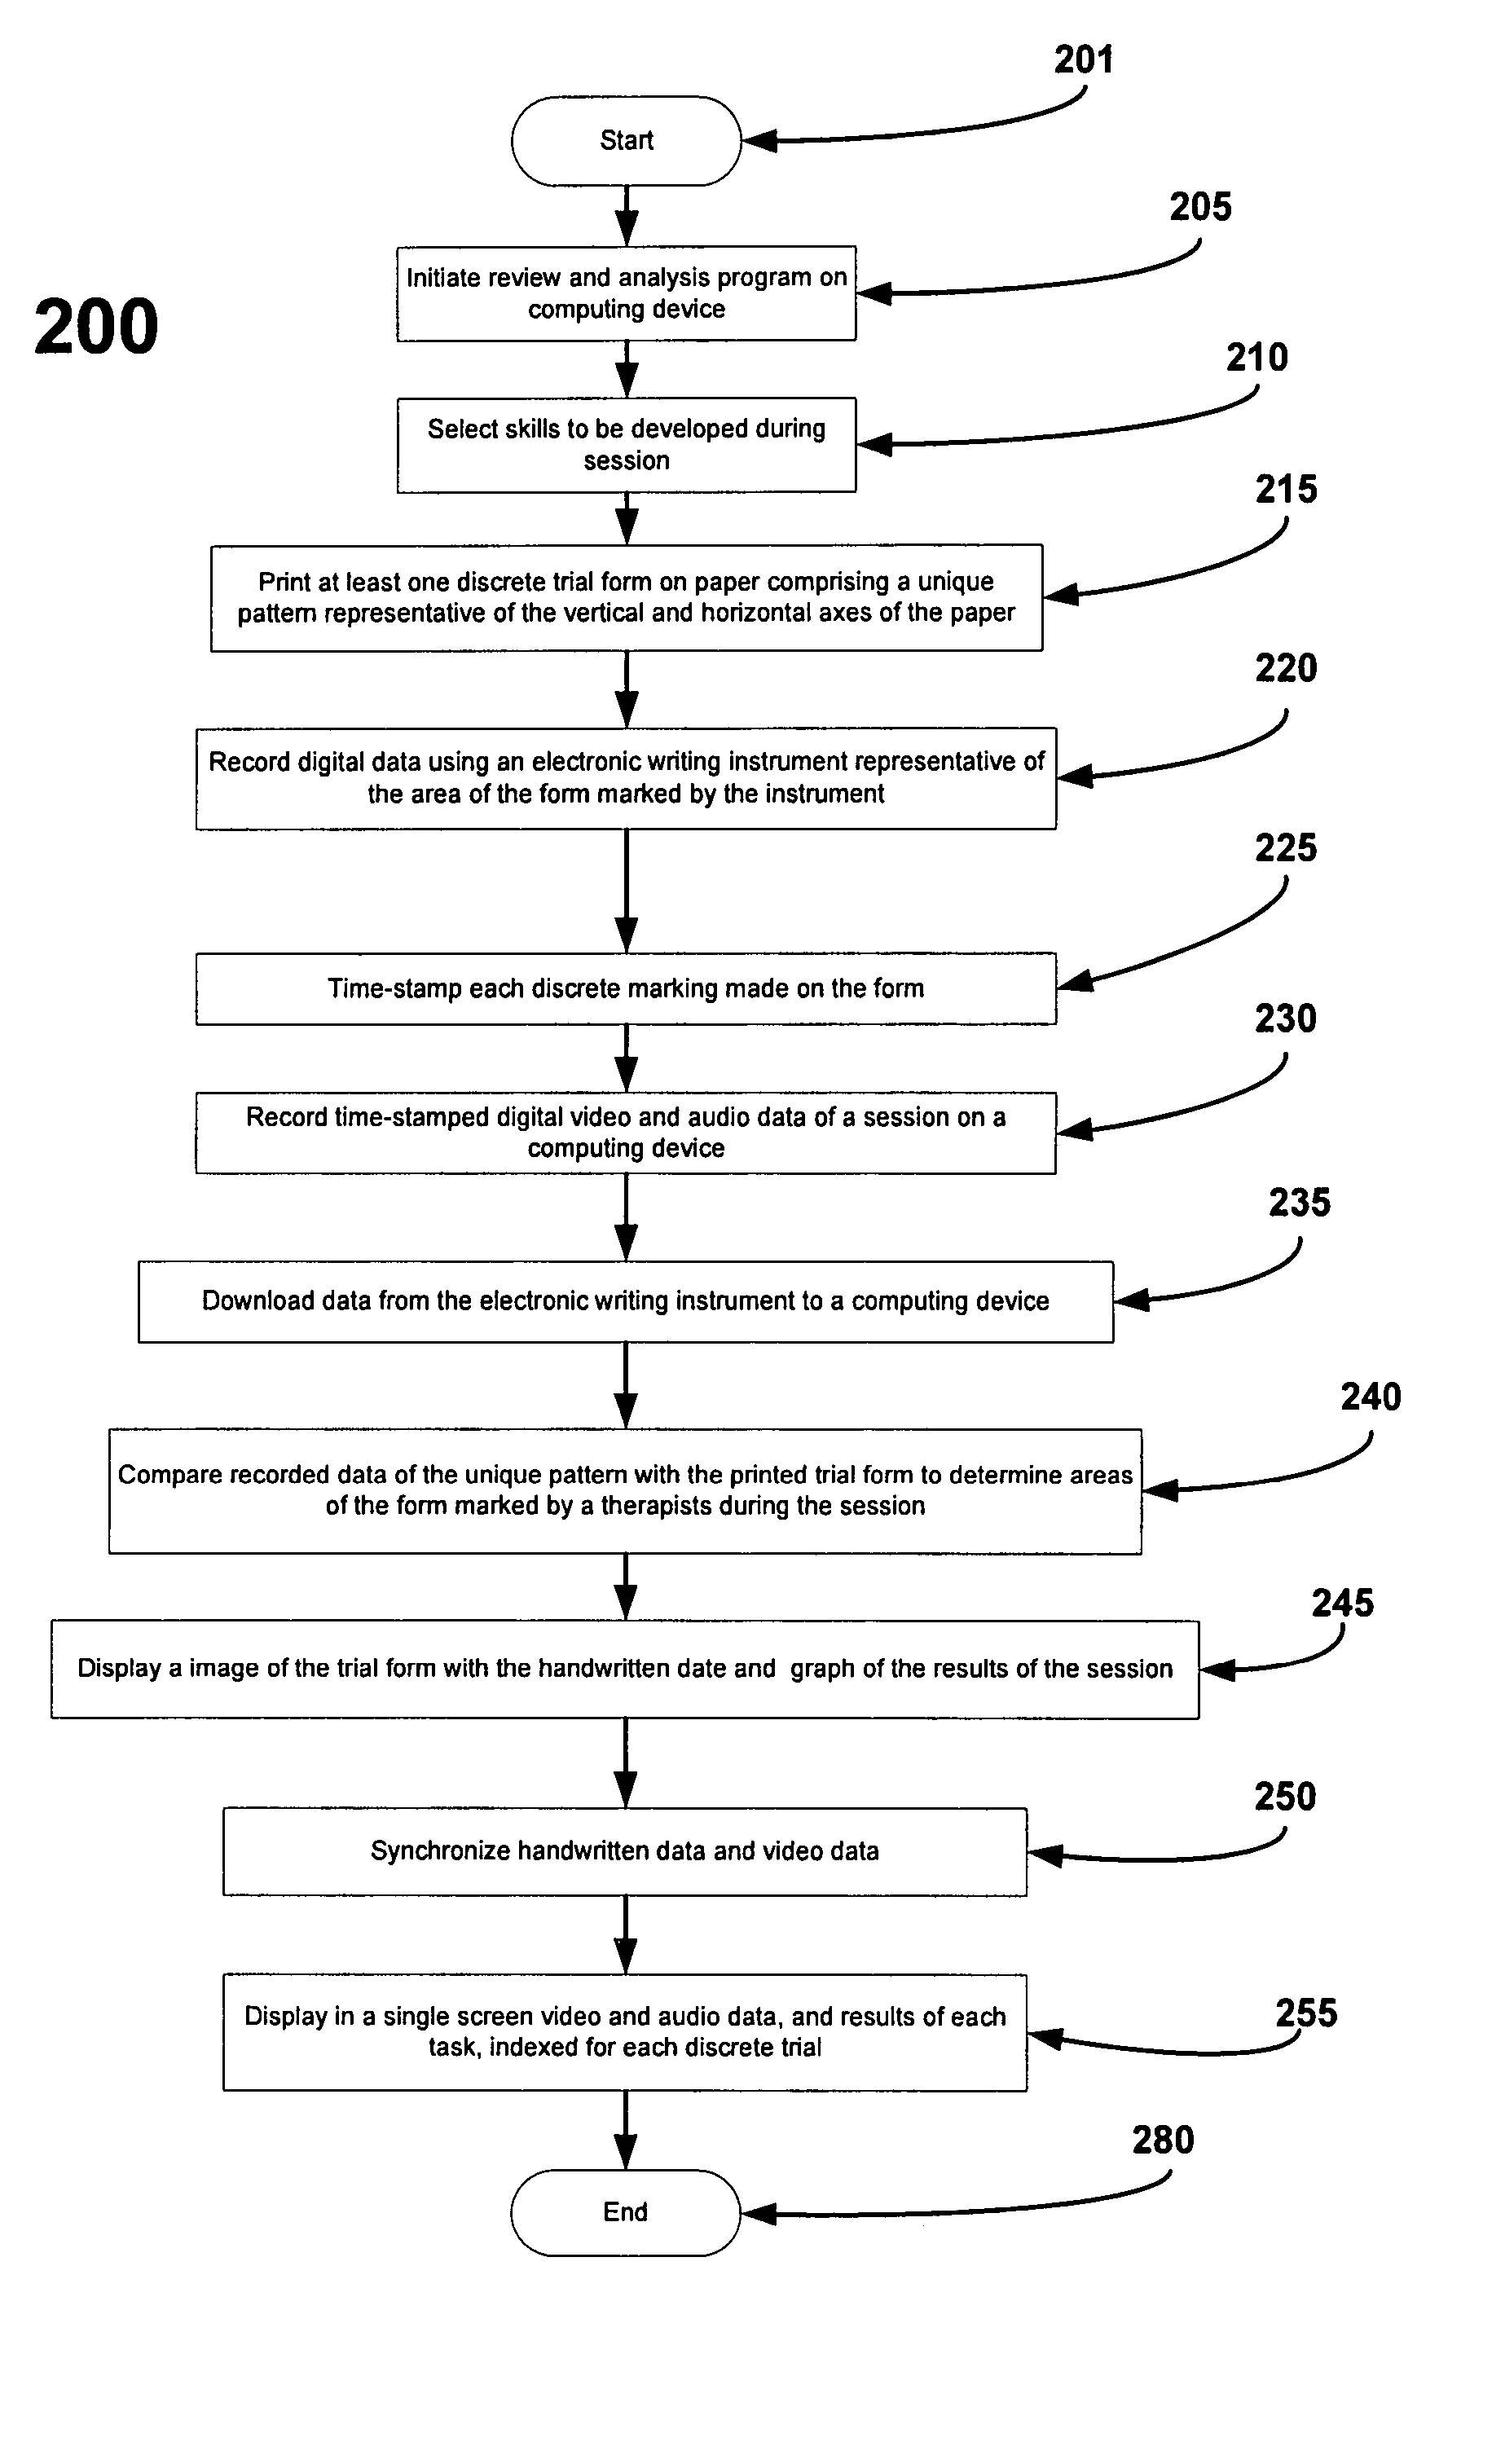 Method and computer program product for synchronizing, displaying, and providing access to data collected from various media